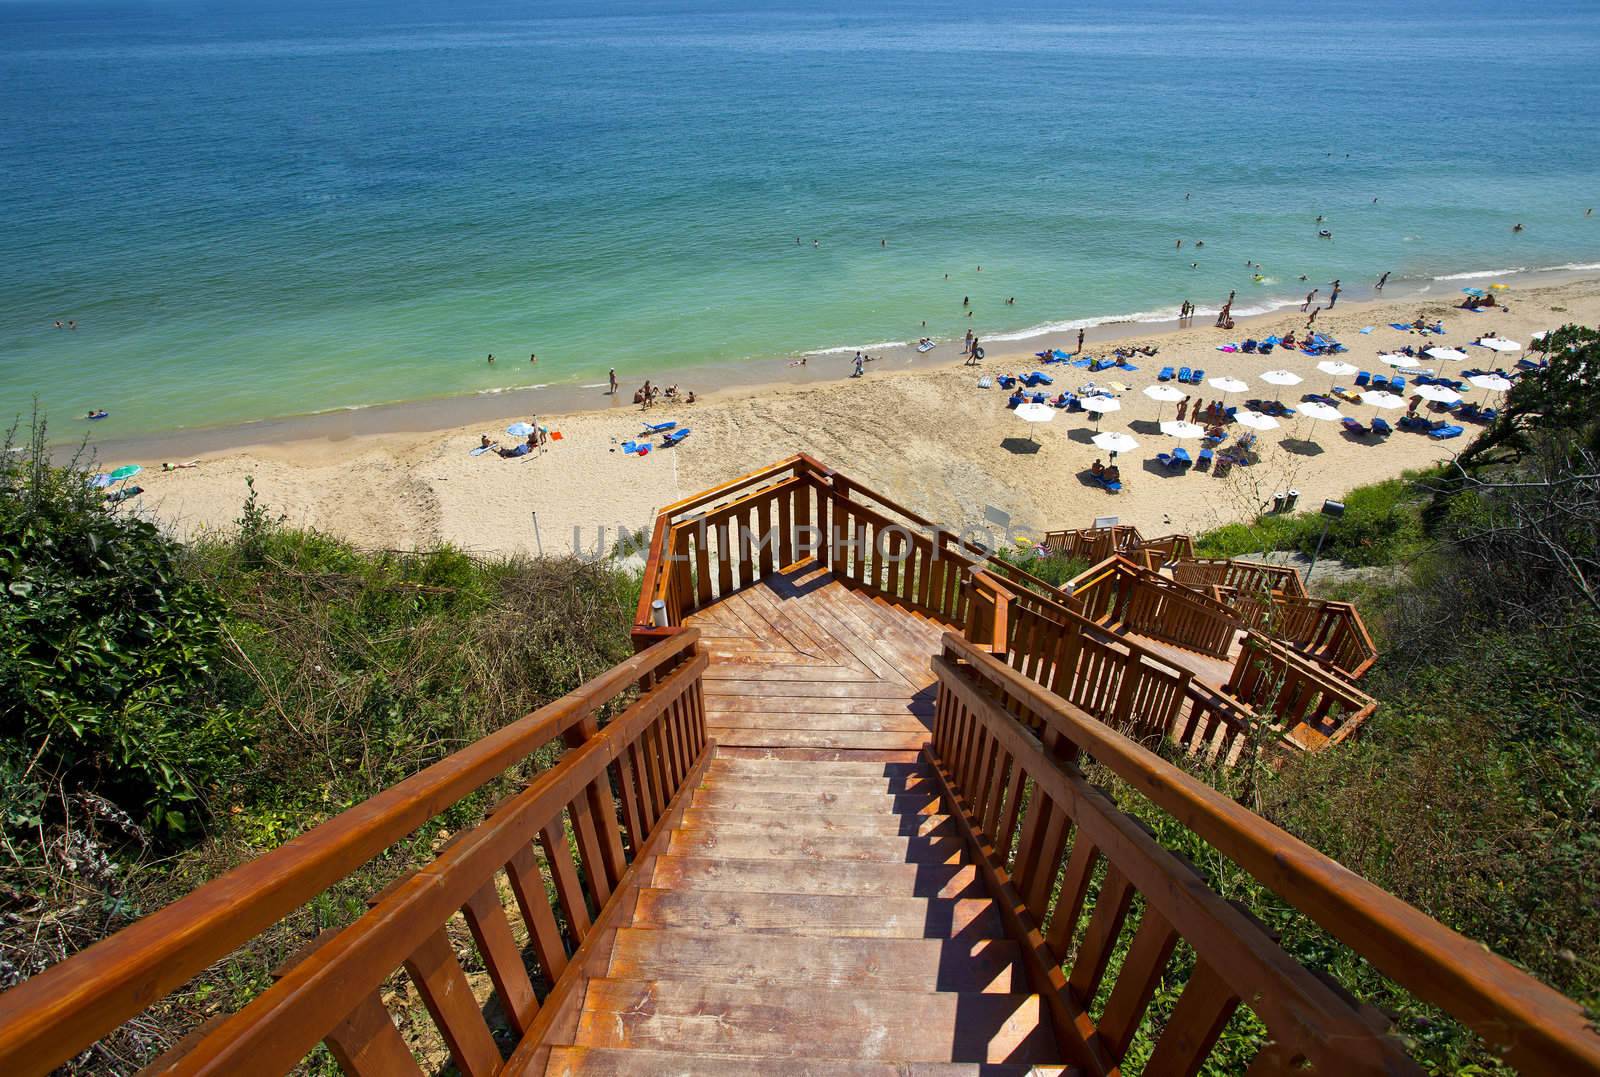 Wooden stairway leading to a sand beach with umbrellas